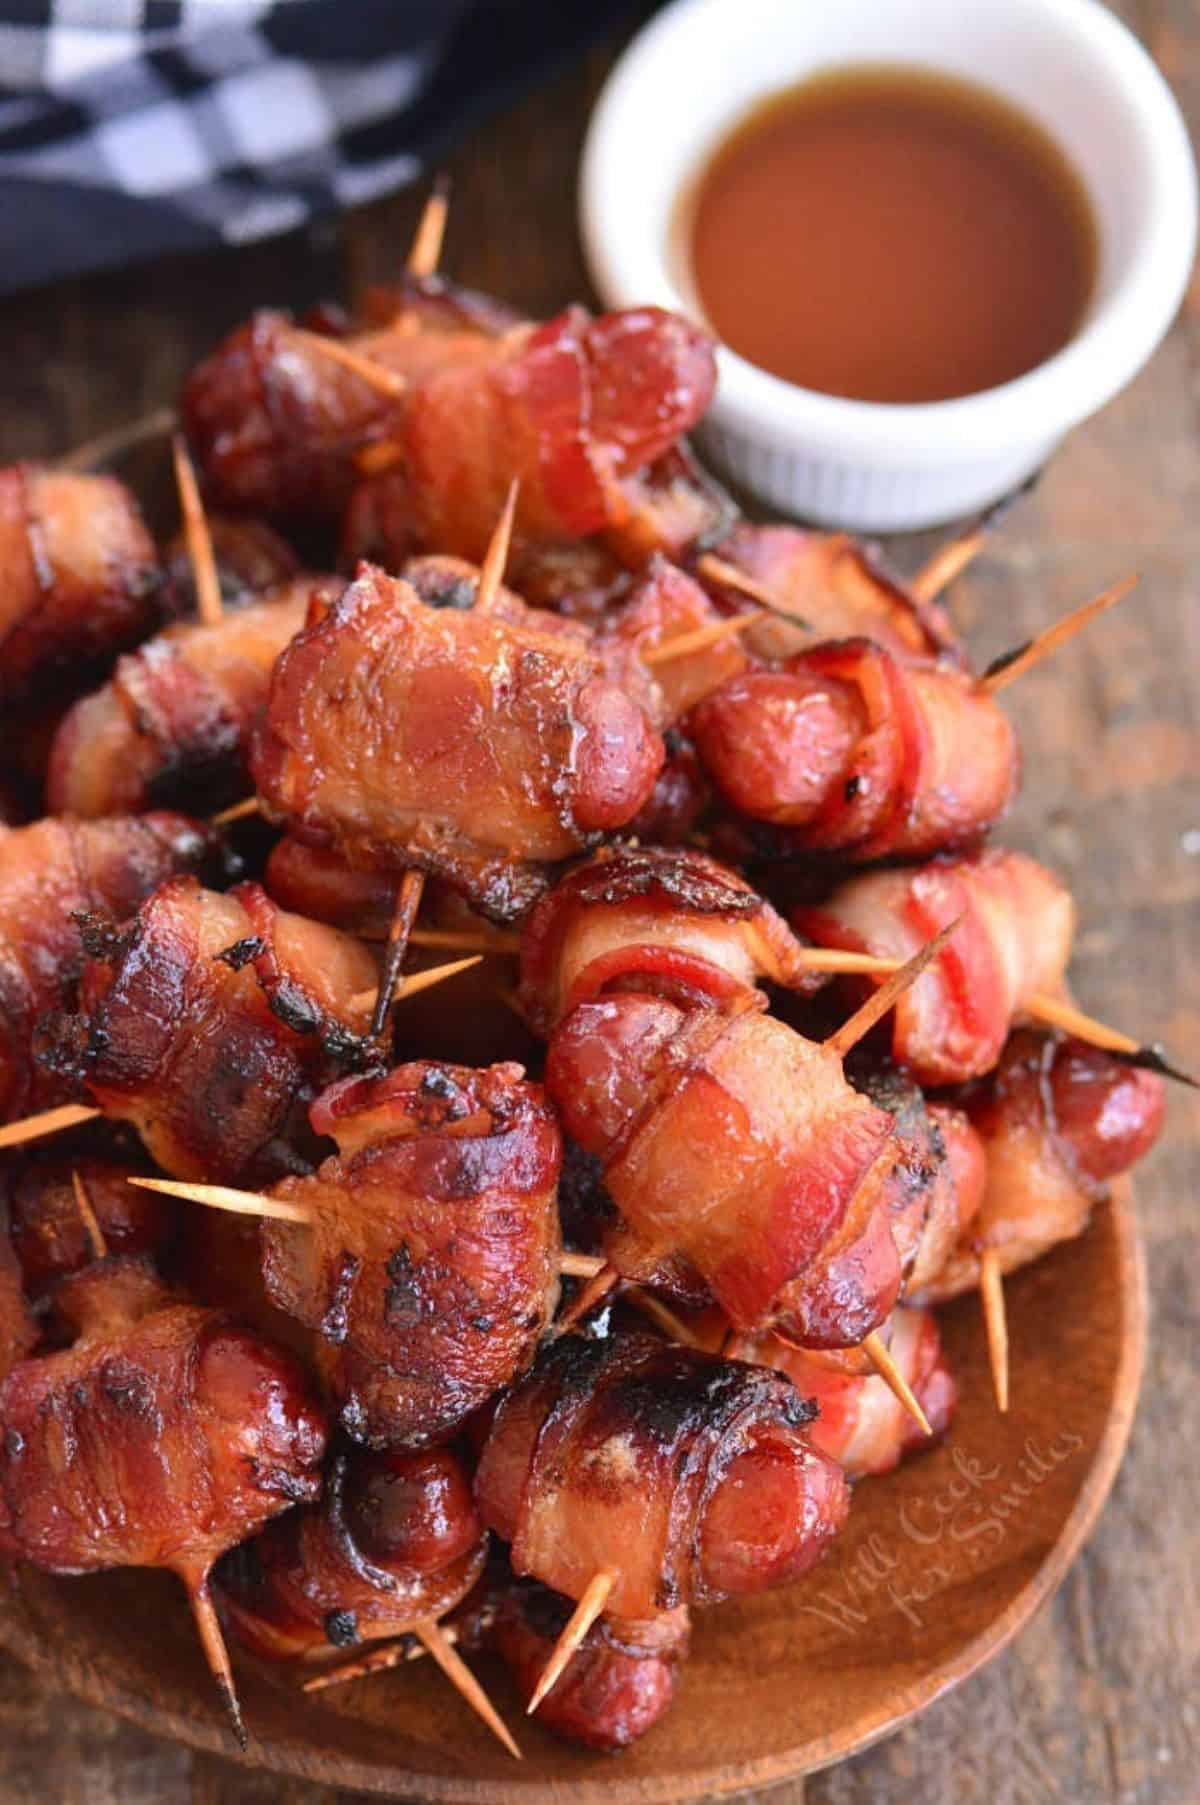 several little smokies sausages wrapped in bacon next to some maple syrup.